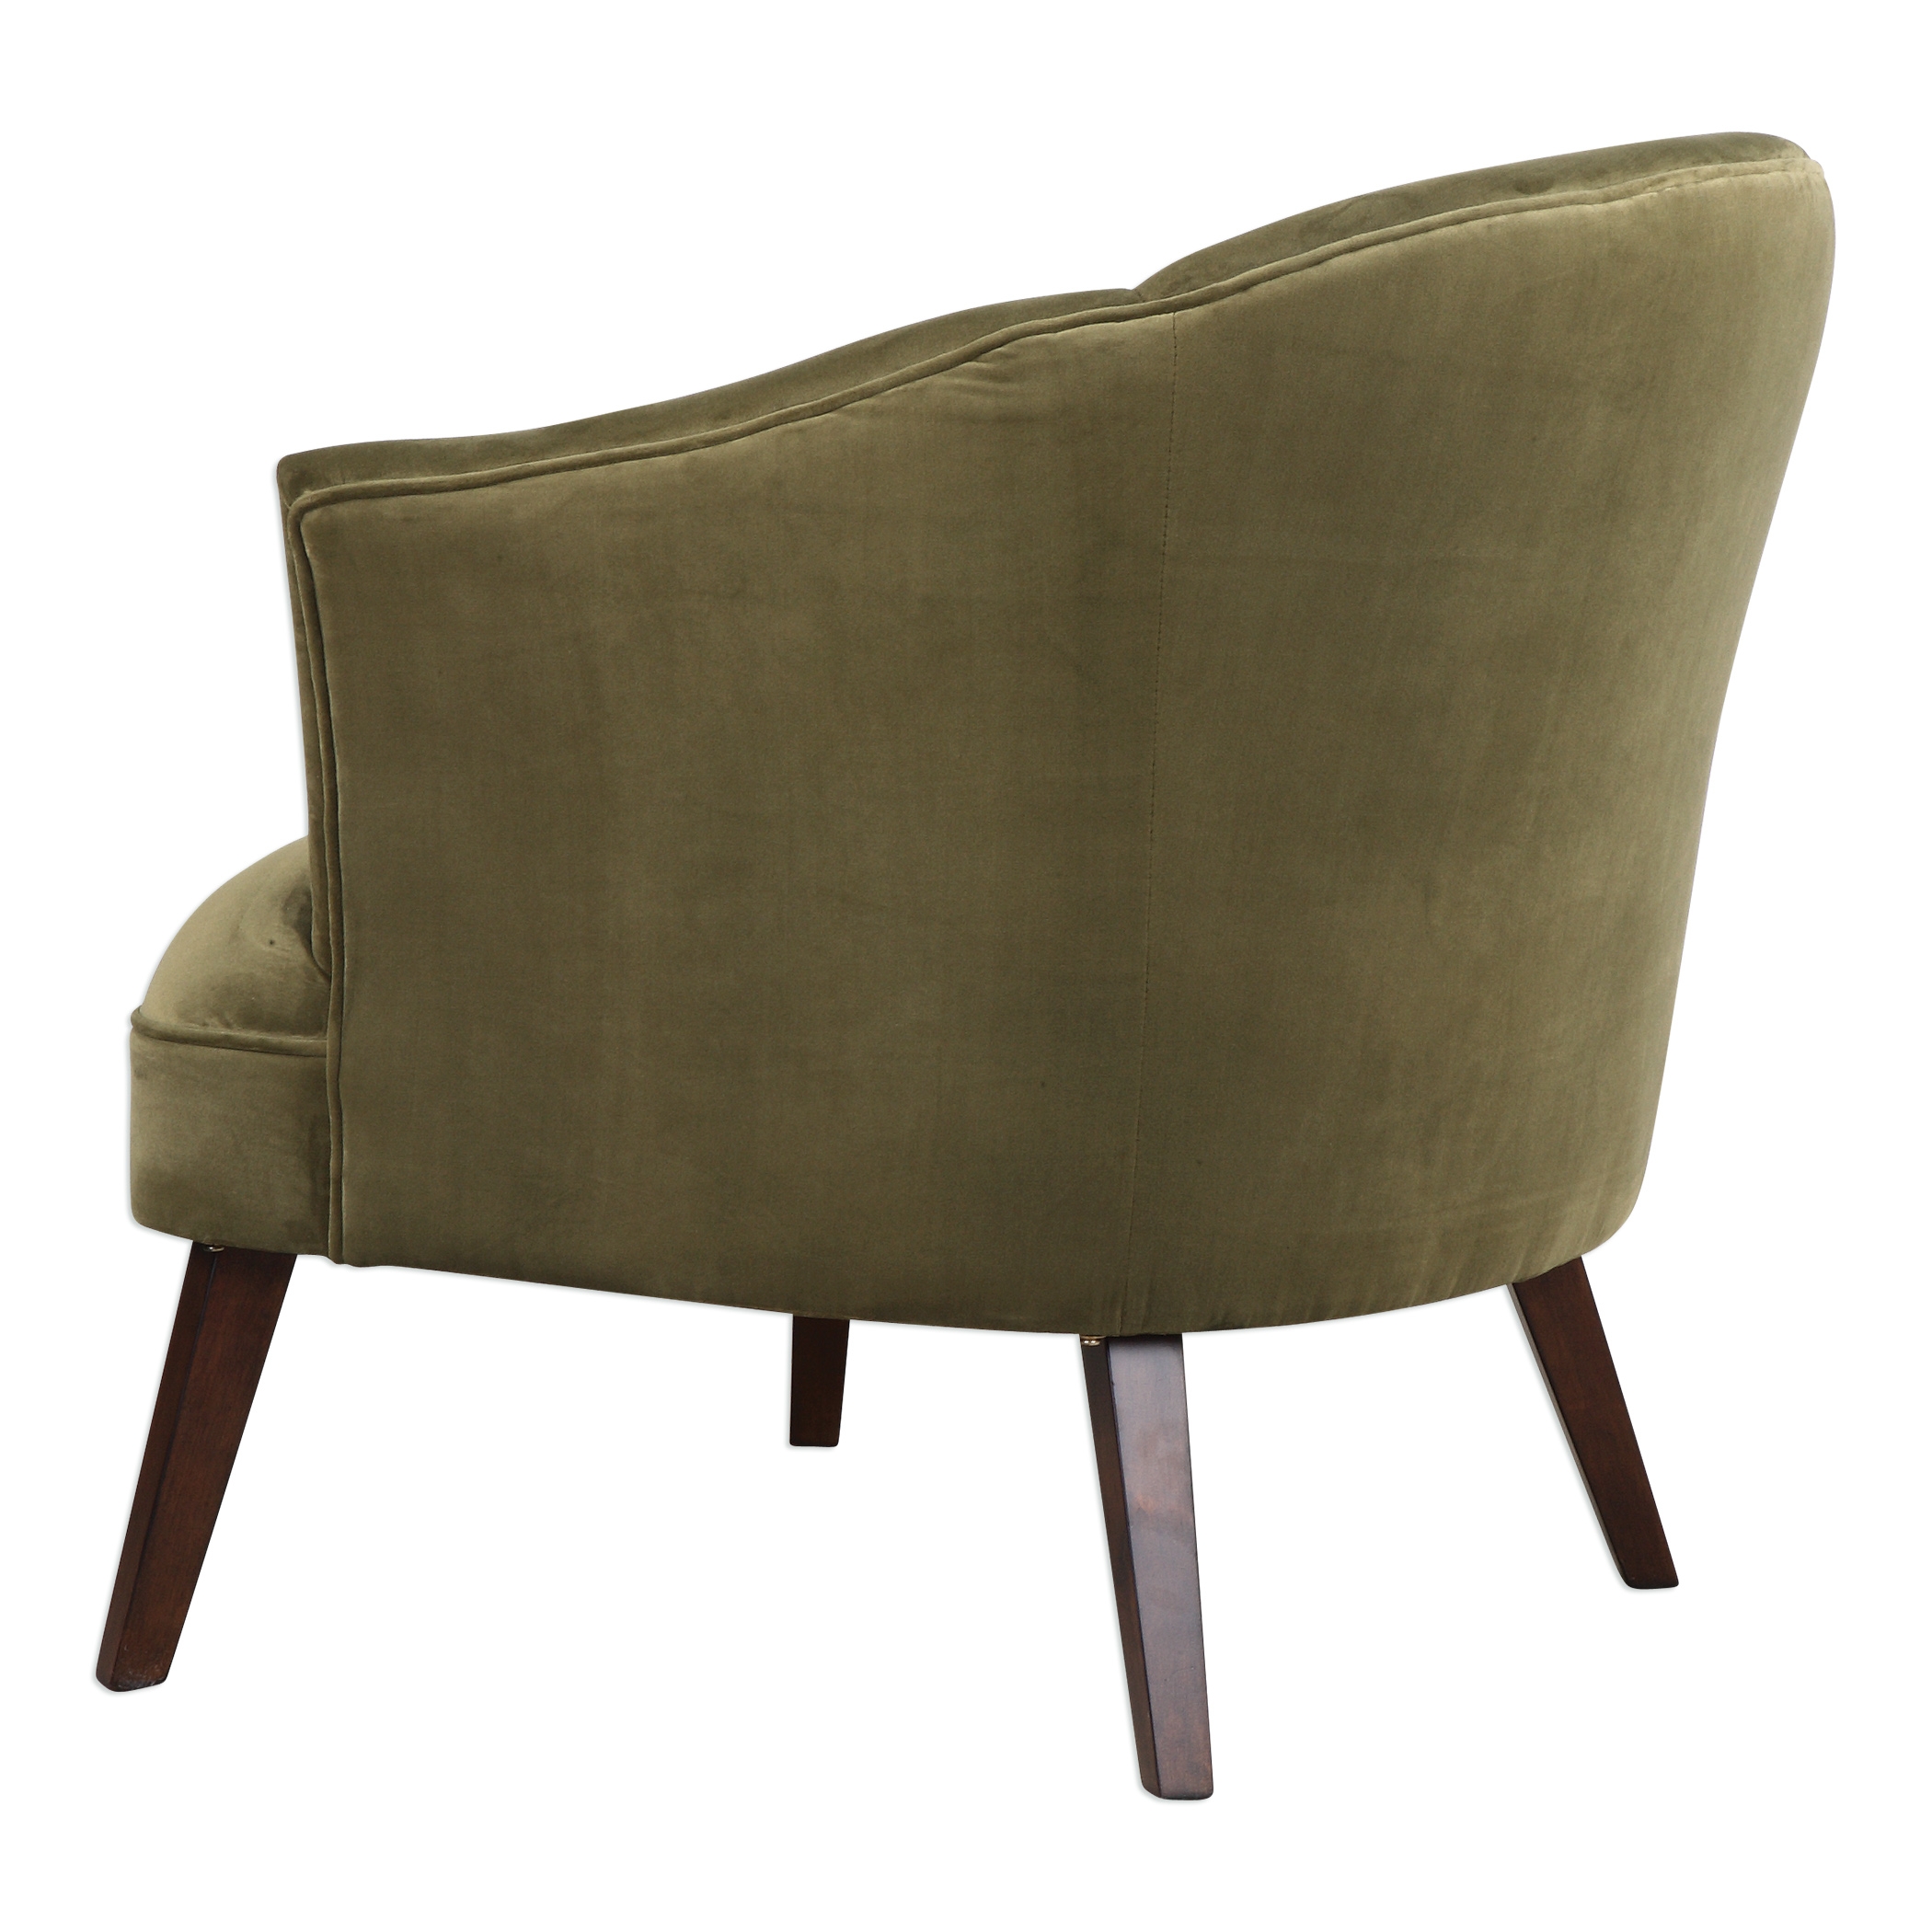 Conroy Accent Chair, Olive - Image 6